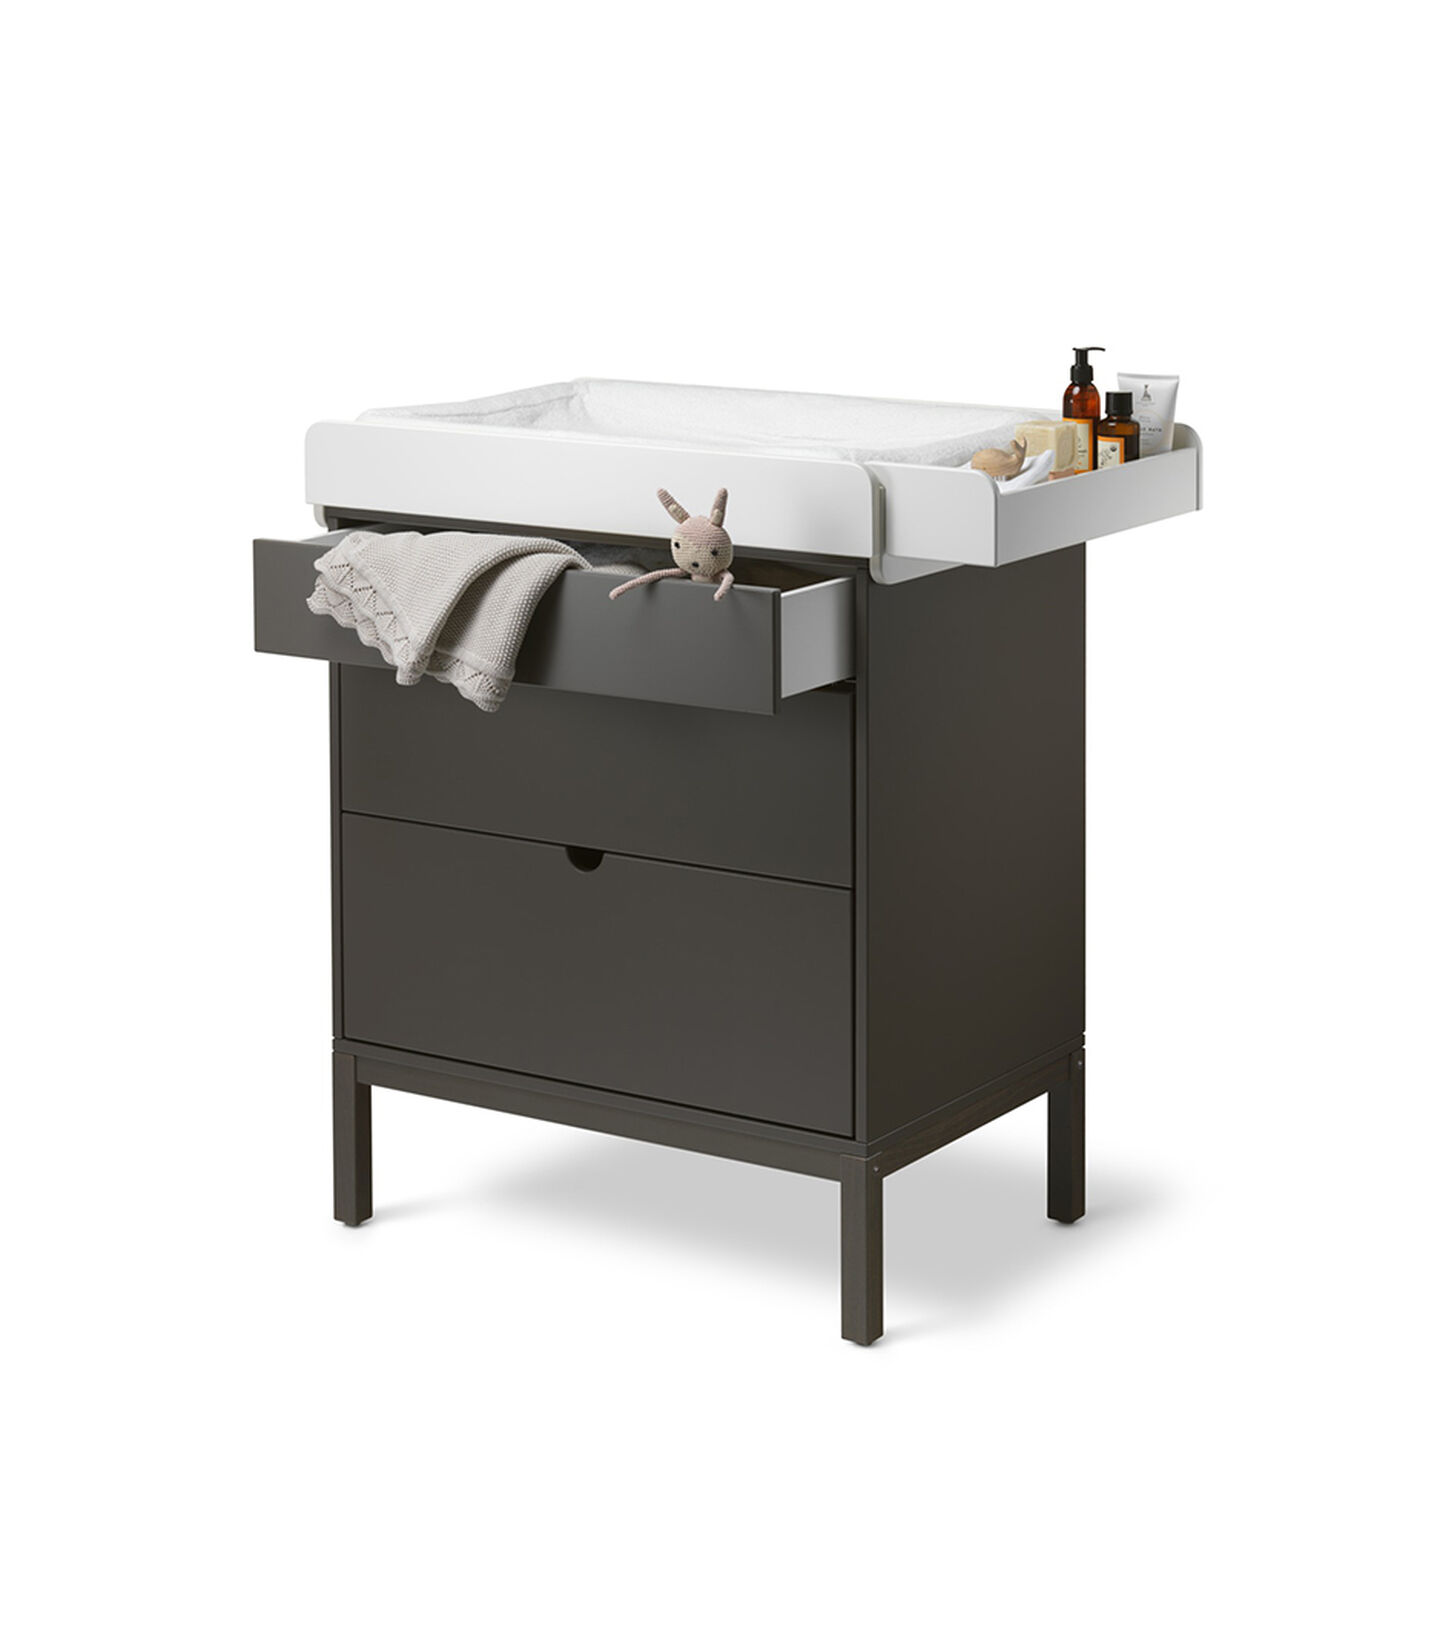 Stokke® Home™ Dresser, Hazy Grey. With Changer. view 5